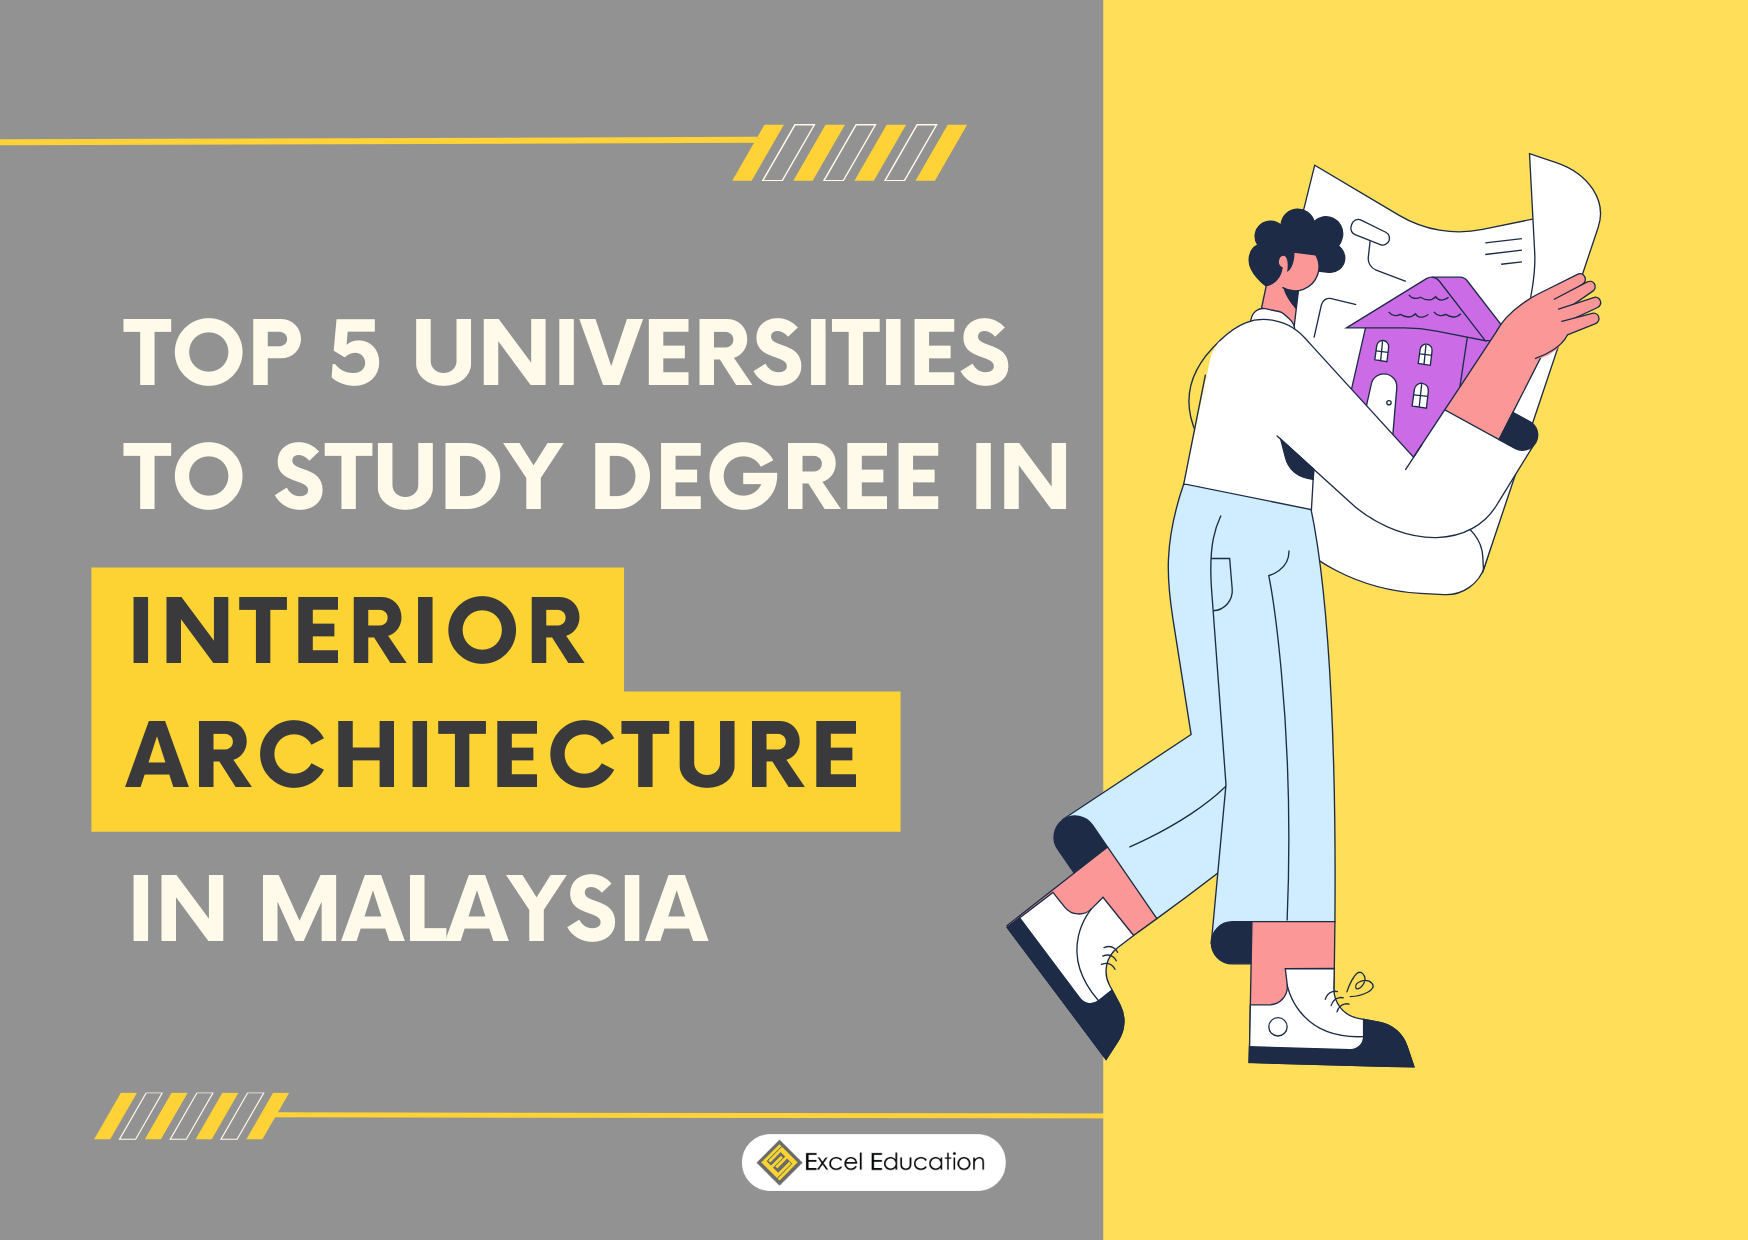 Top 5 Universities To Study Degree In Interior Architecture In Malaysia Title Image 1 